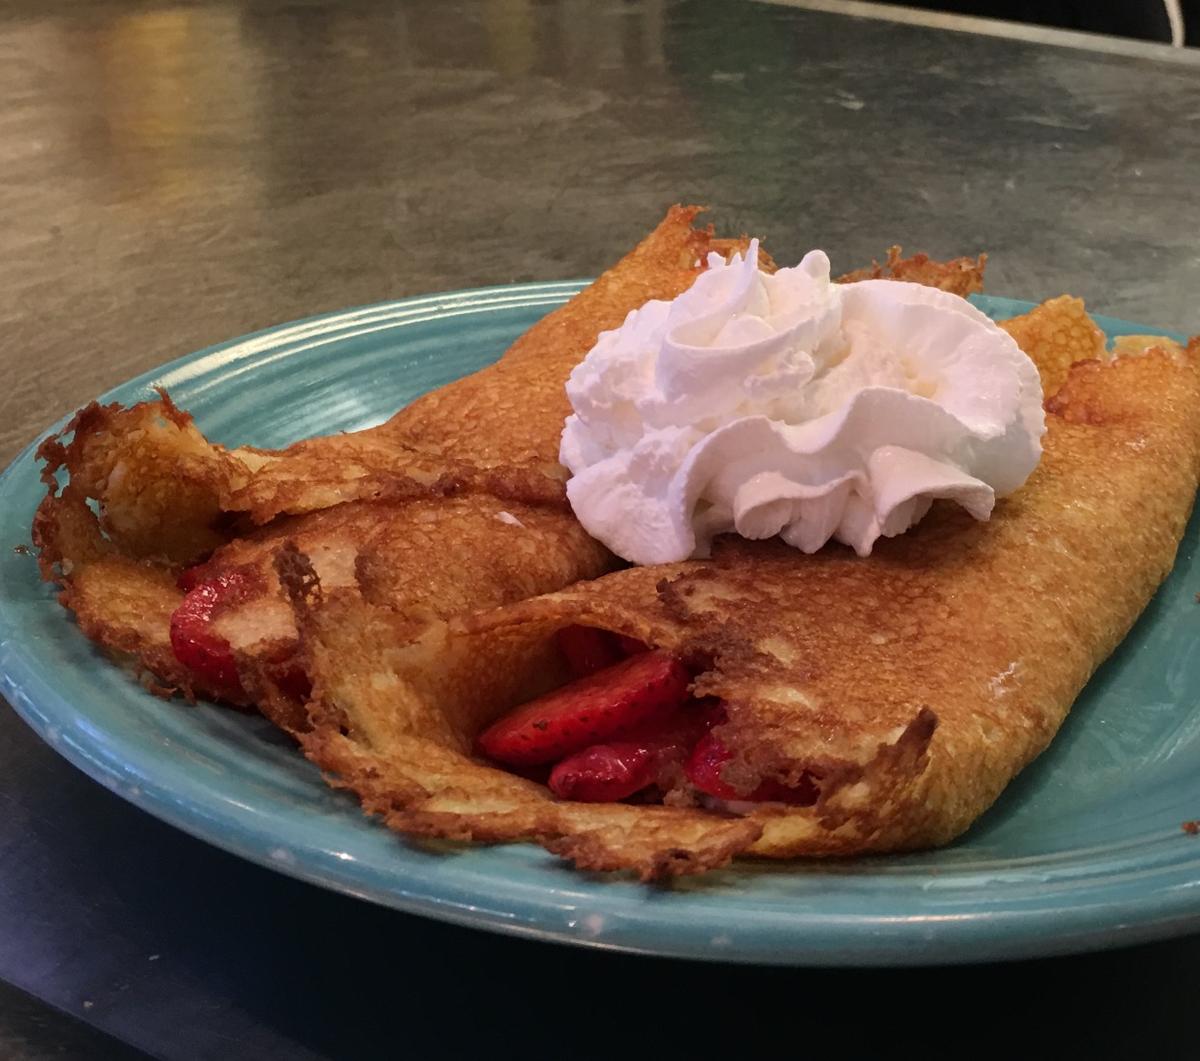 Pamela's Diner's hotcakes are thinner than typical fluffy pancakes, and they come out plate-sized with crispy edges. (Courtesy of Pamela's Diner)